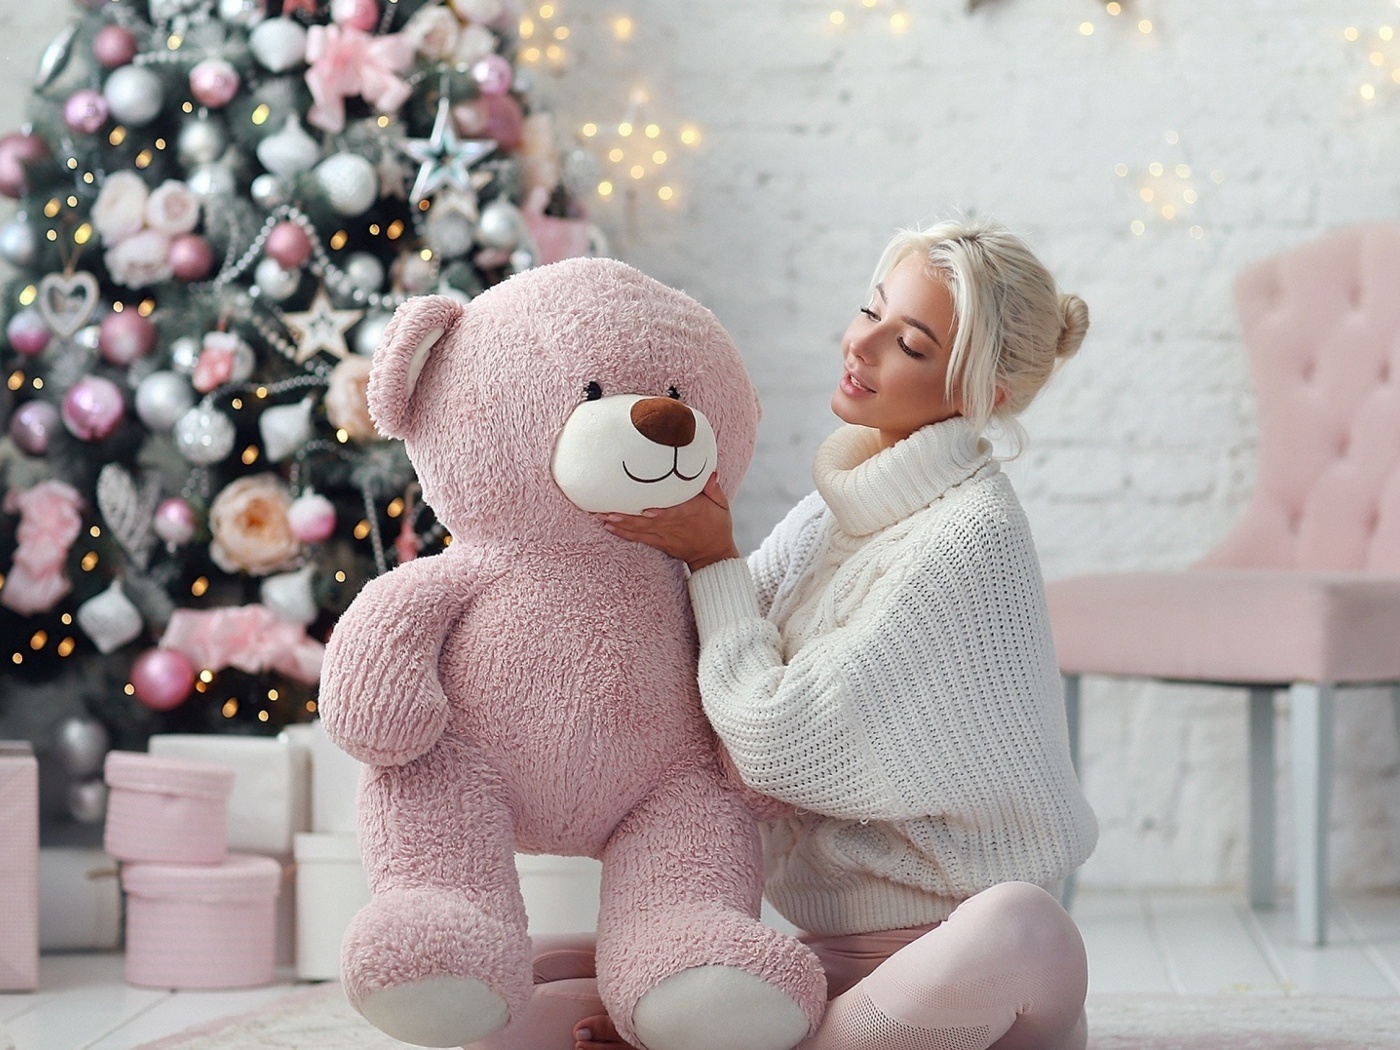 Das Christmas photo session with bear Wallpaper 1400x1050